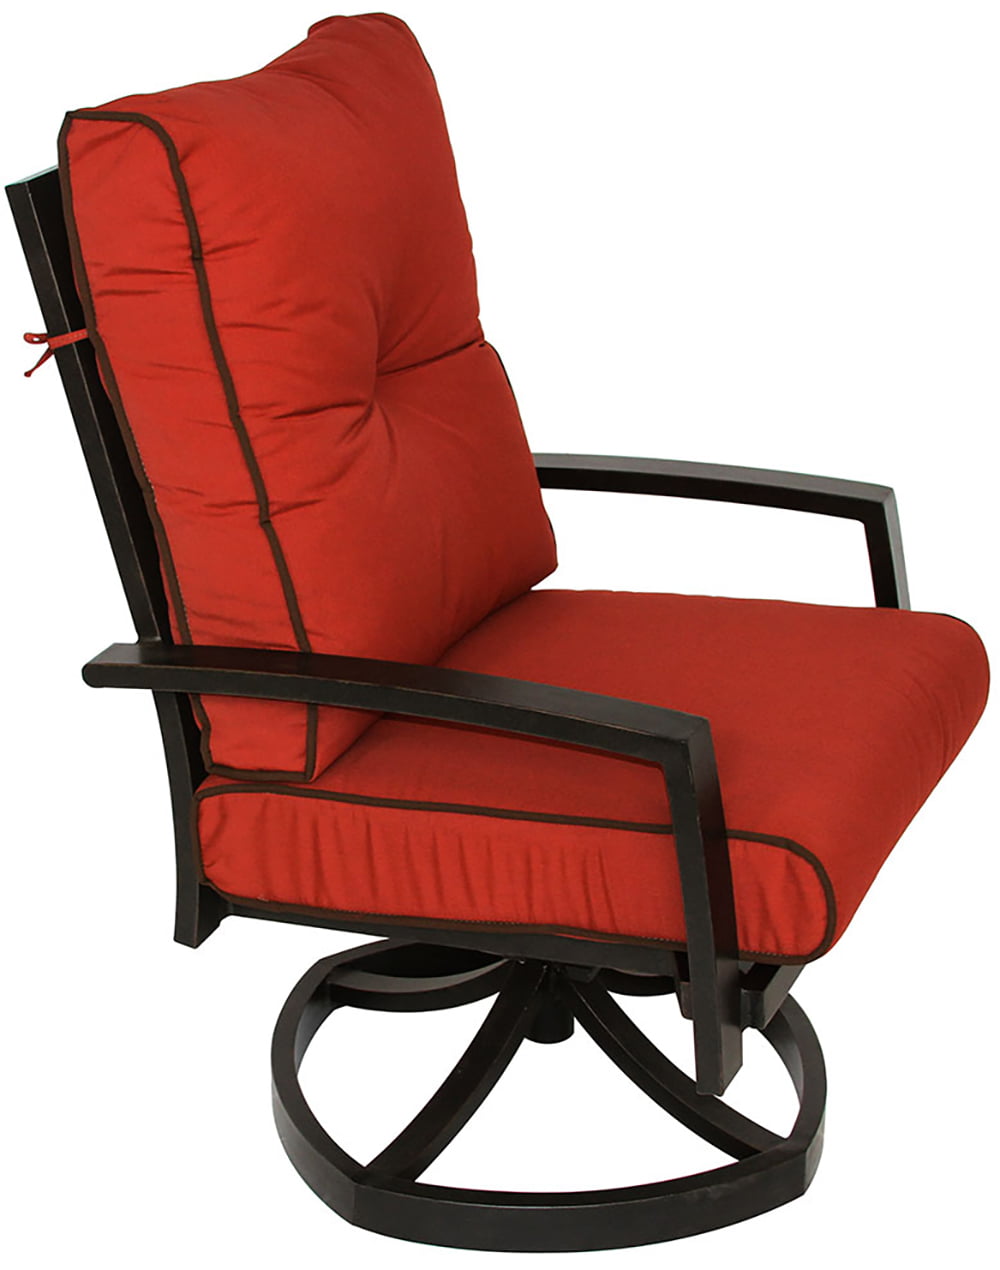 Outdoor Patio Furniture With Swivel Chairs : Outdoor Wicker Swivel ...